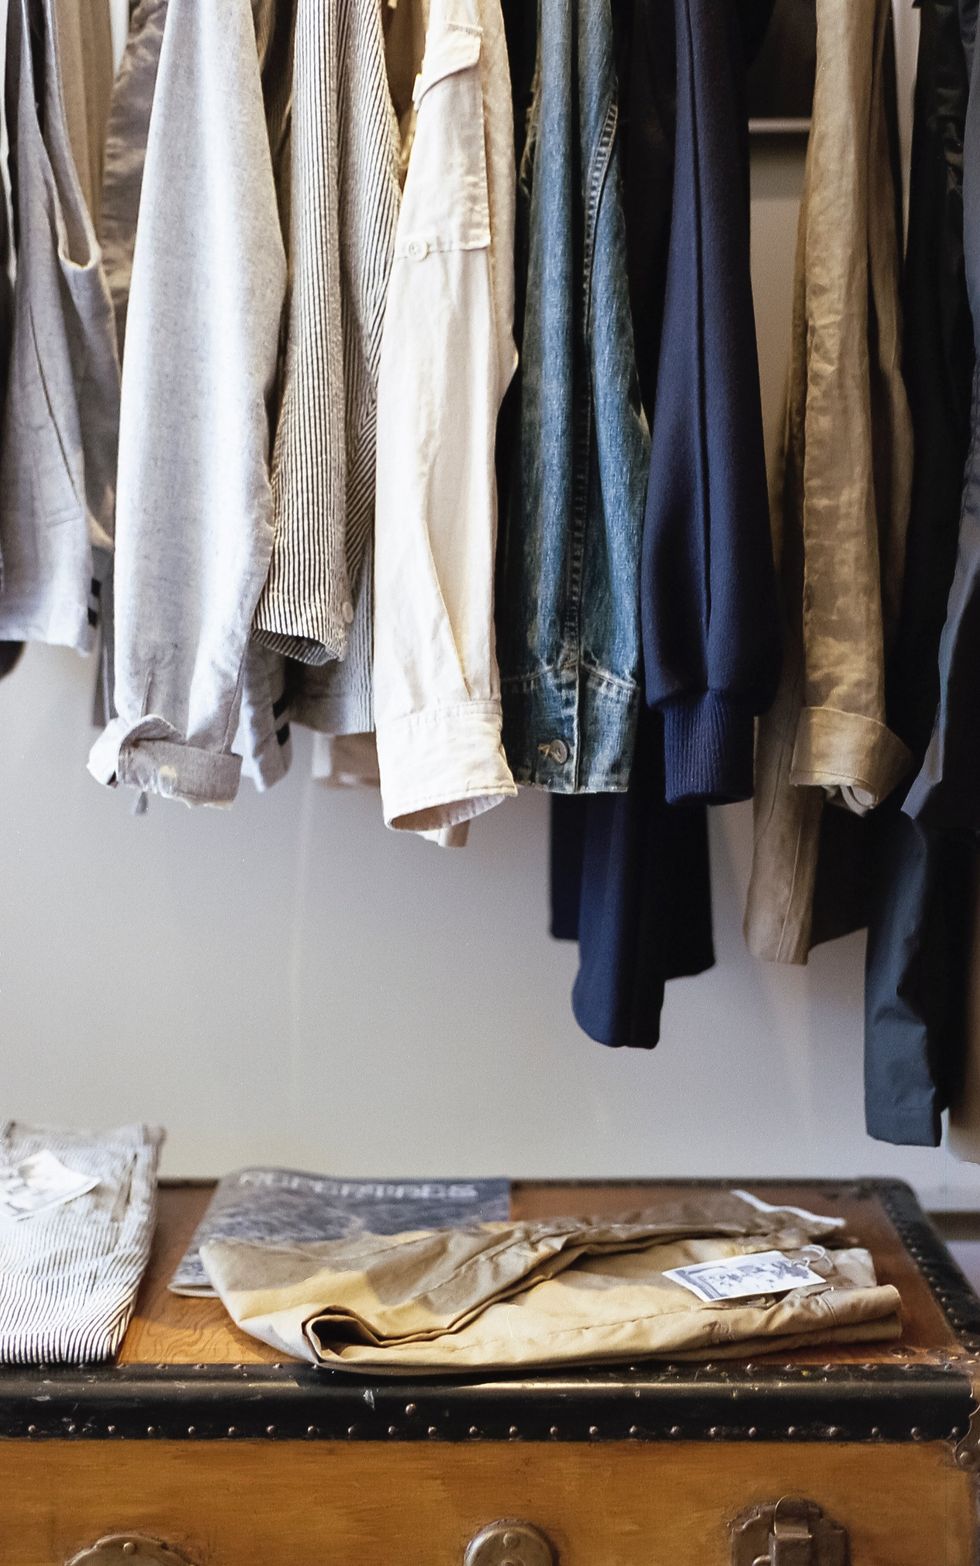 5 Items Everyone Needs In Their Closet